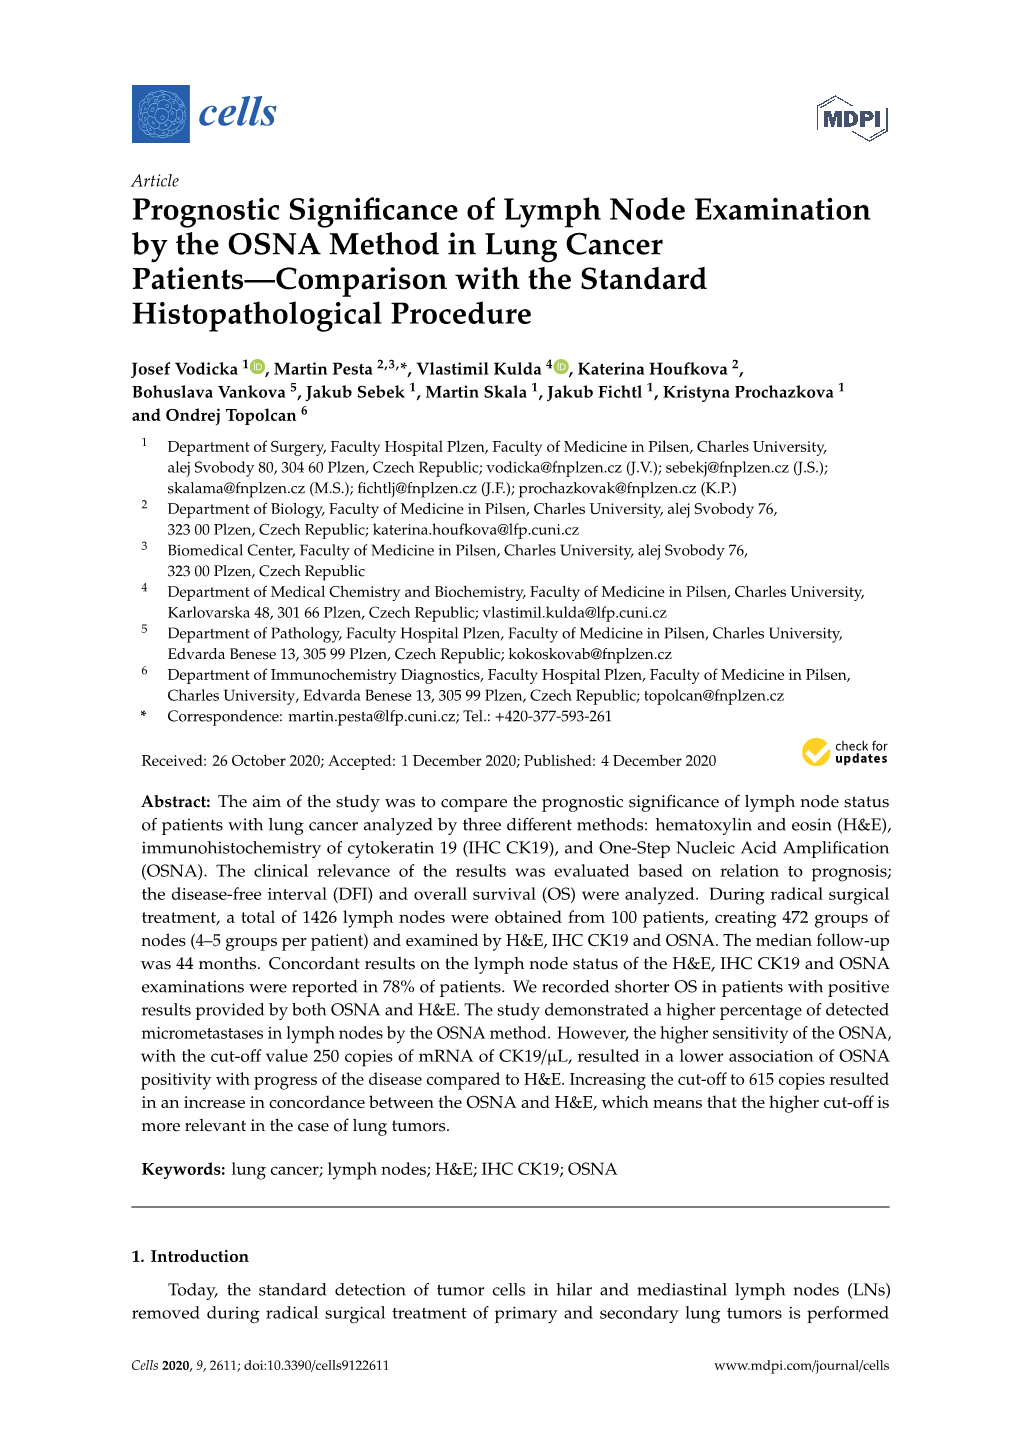 Prognostic Significance of Lymph Node Examination by the OSNA